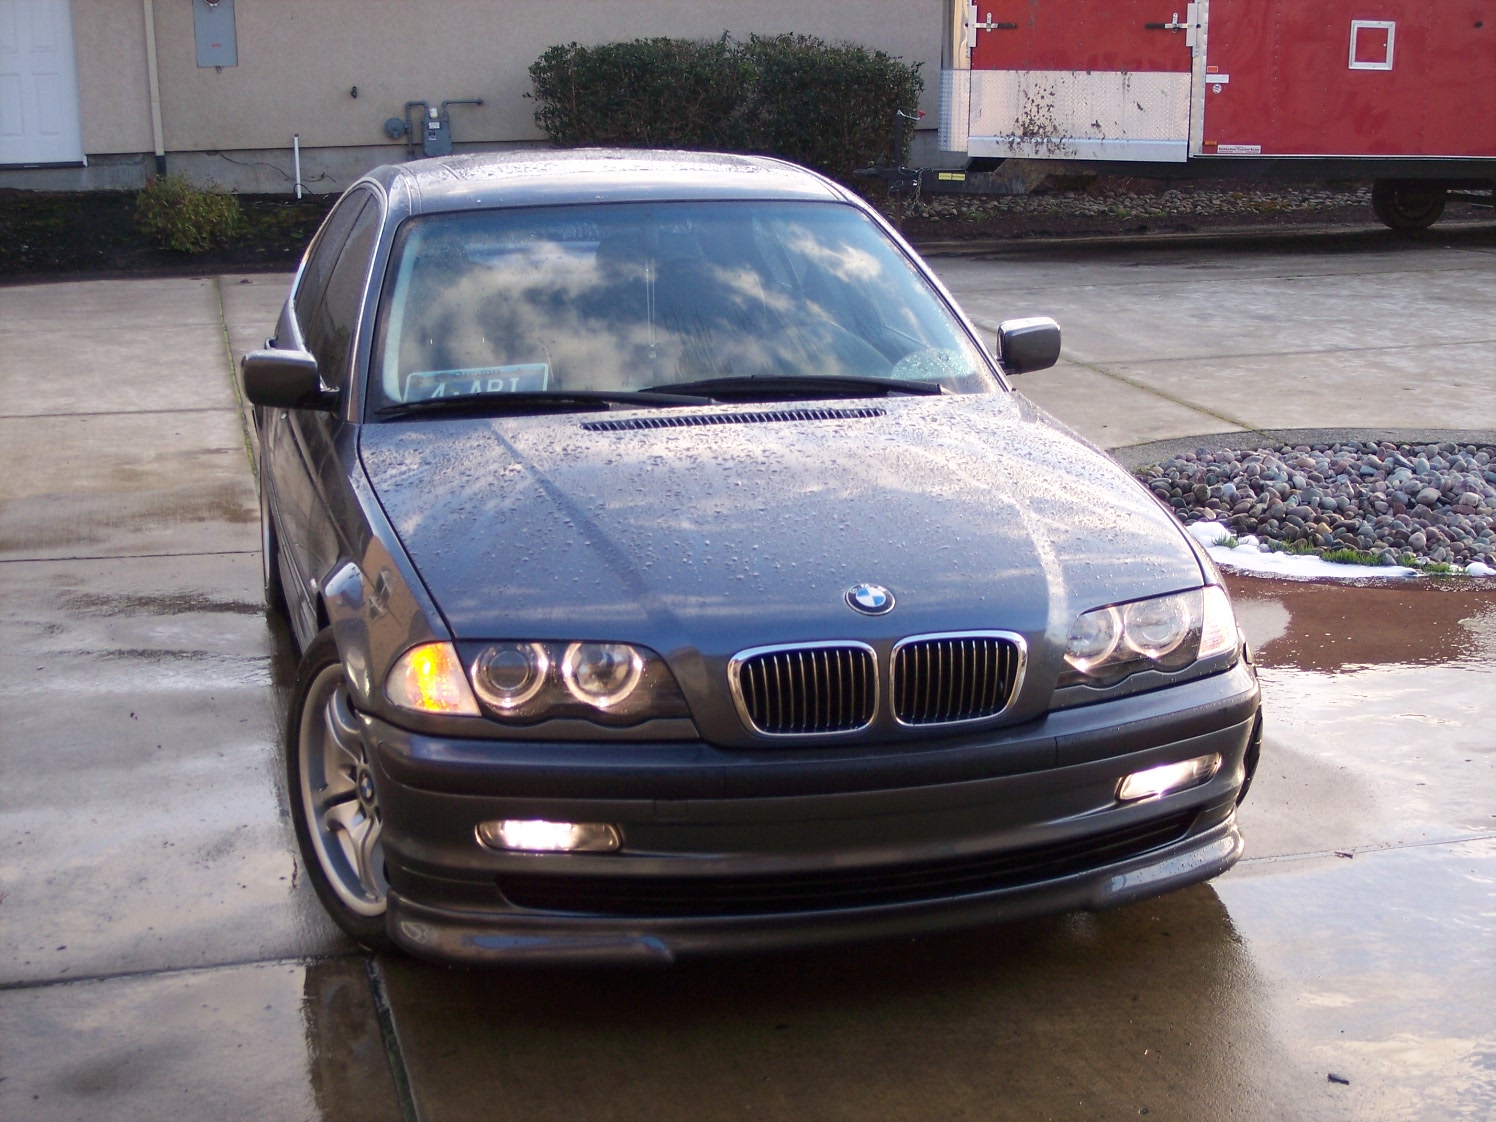 bmw 330xi 2001 review amazing pictures and images look at the car bmw 330xi 2001 review amazing